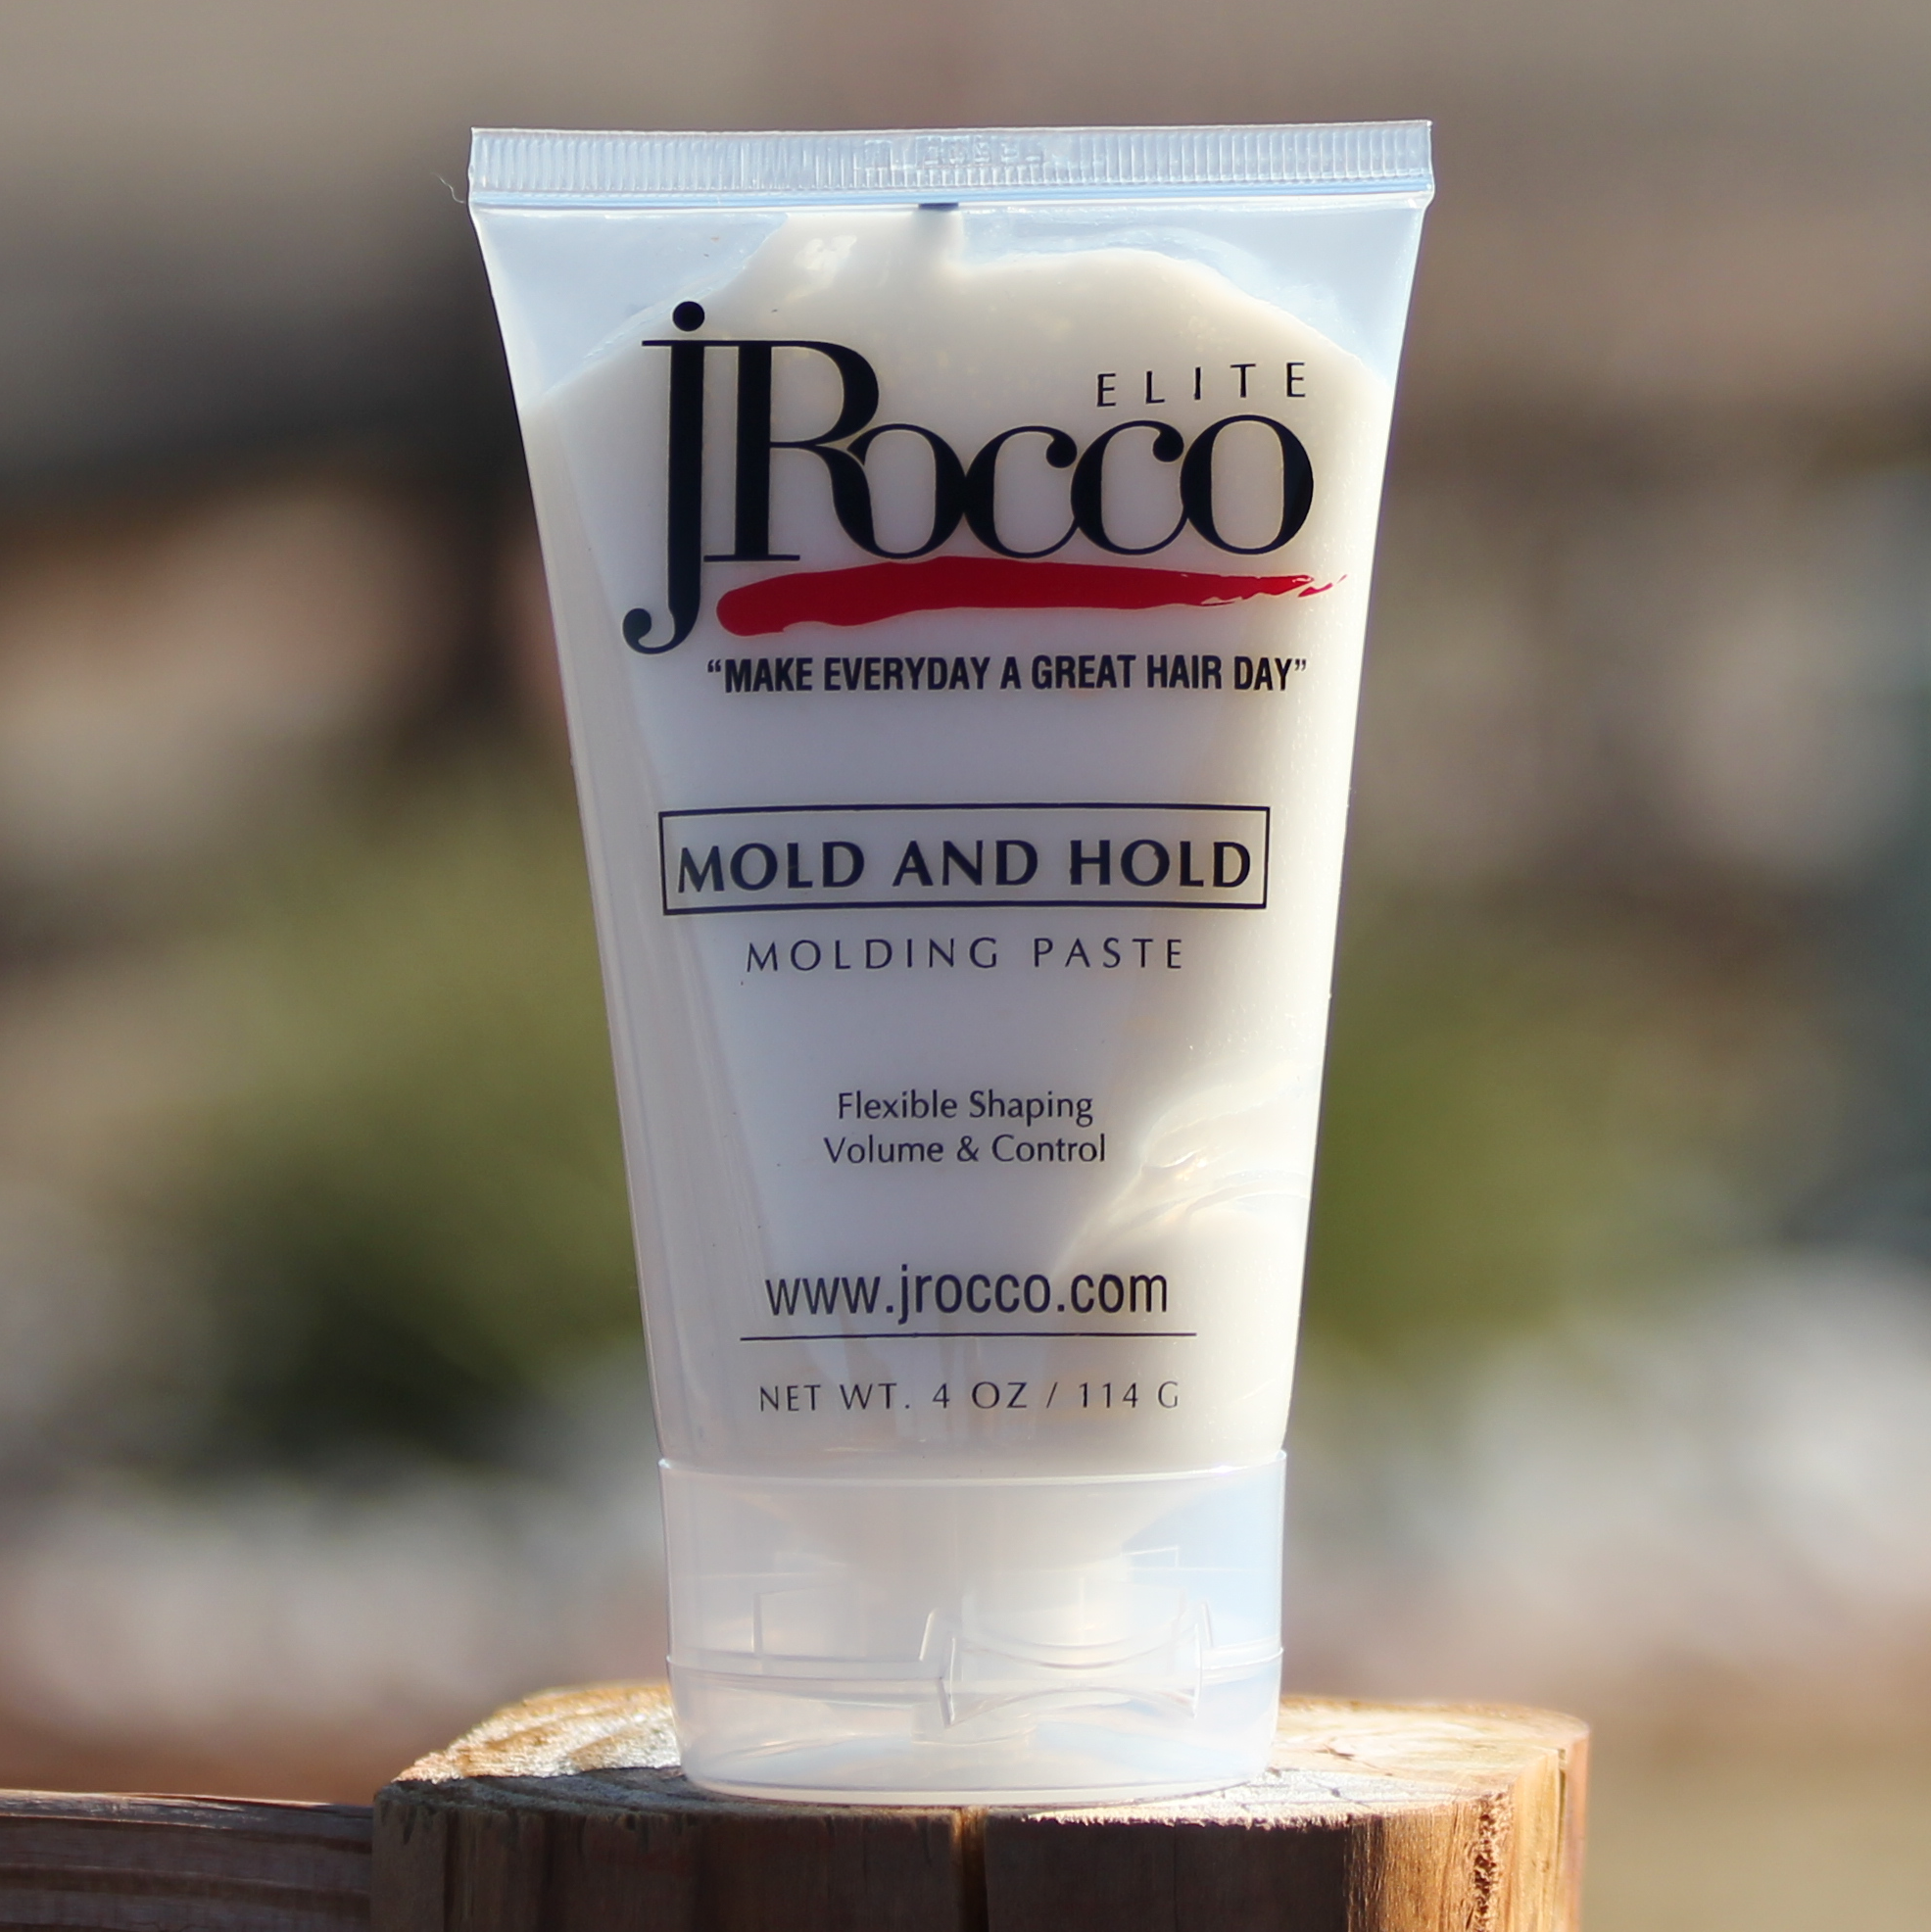 Mold and Hold Molding Paste - jRocco Hair Care